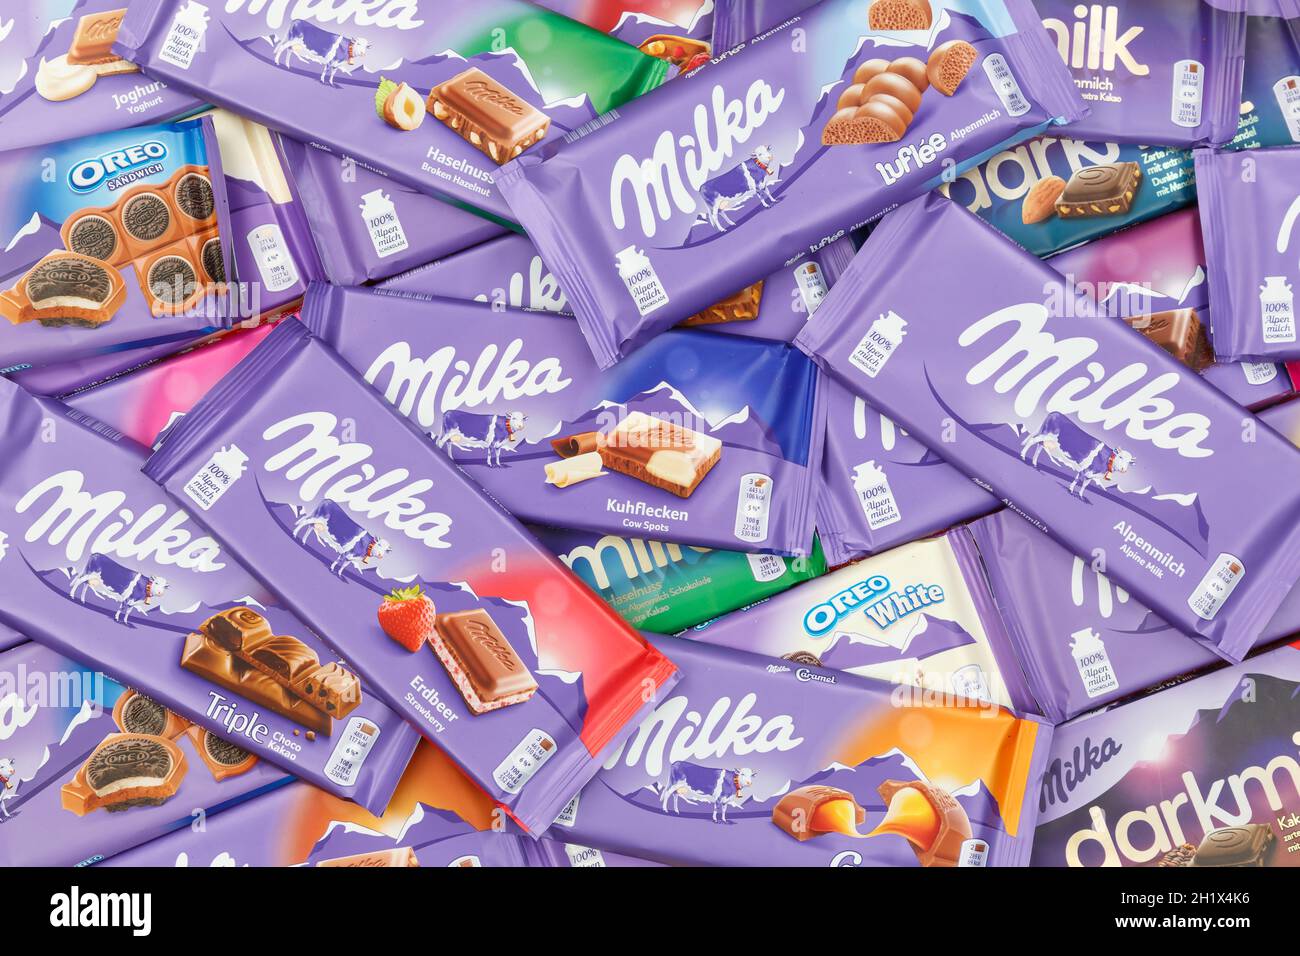 Milka images germany hi-res - stock and photography Alamy